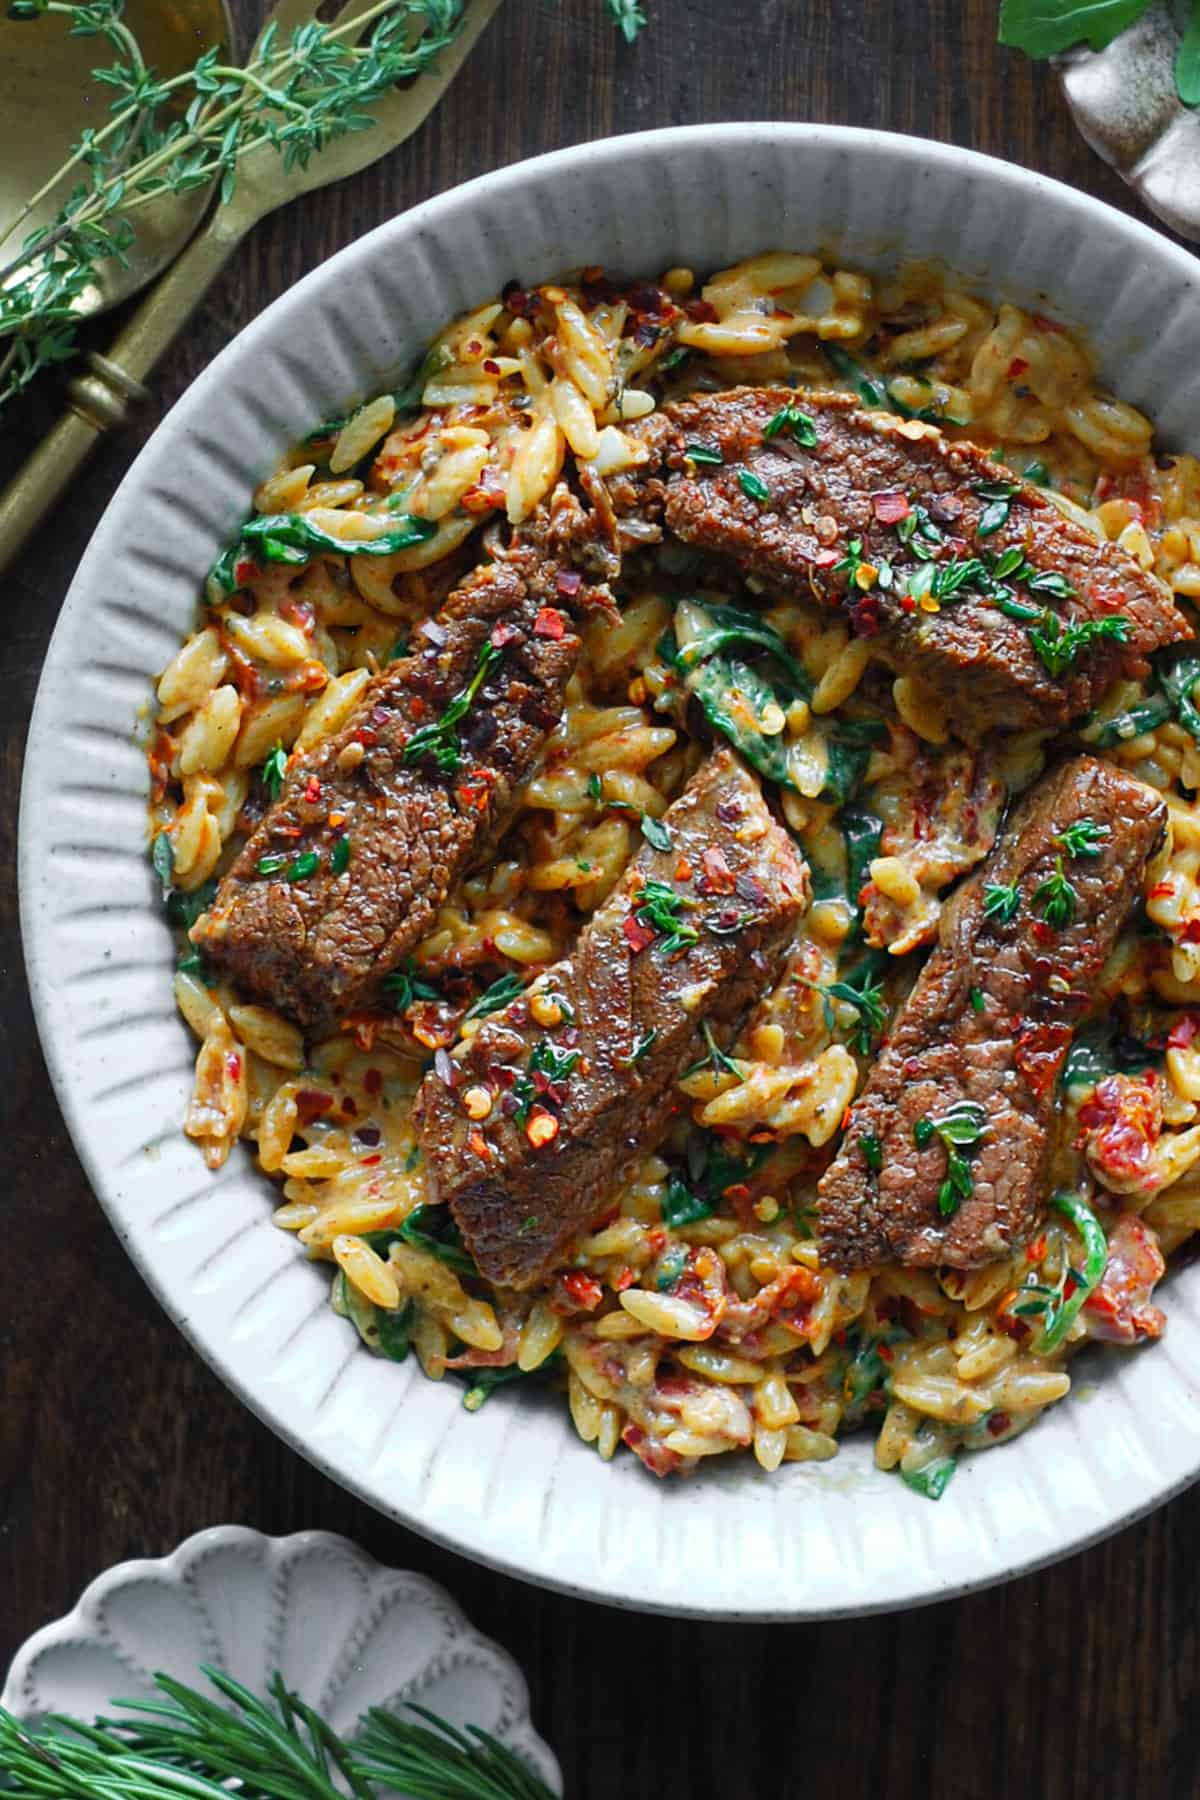 Pan-Seared Flank Steak (sliced) with Creamy Orzo, Spinach, and Sun-Dried Tomatoes - in a white bowl.